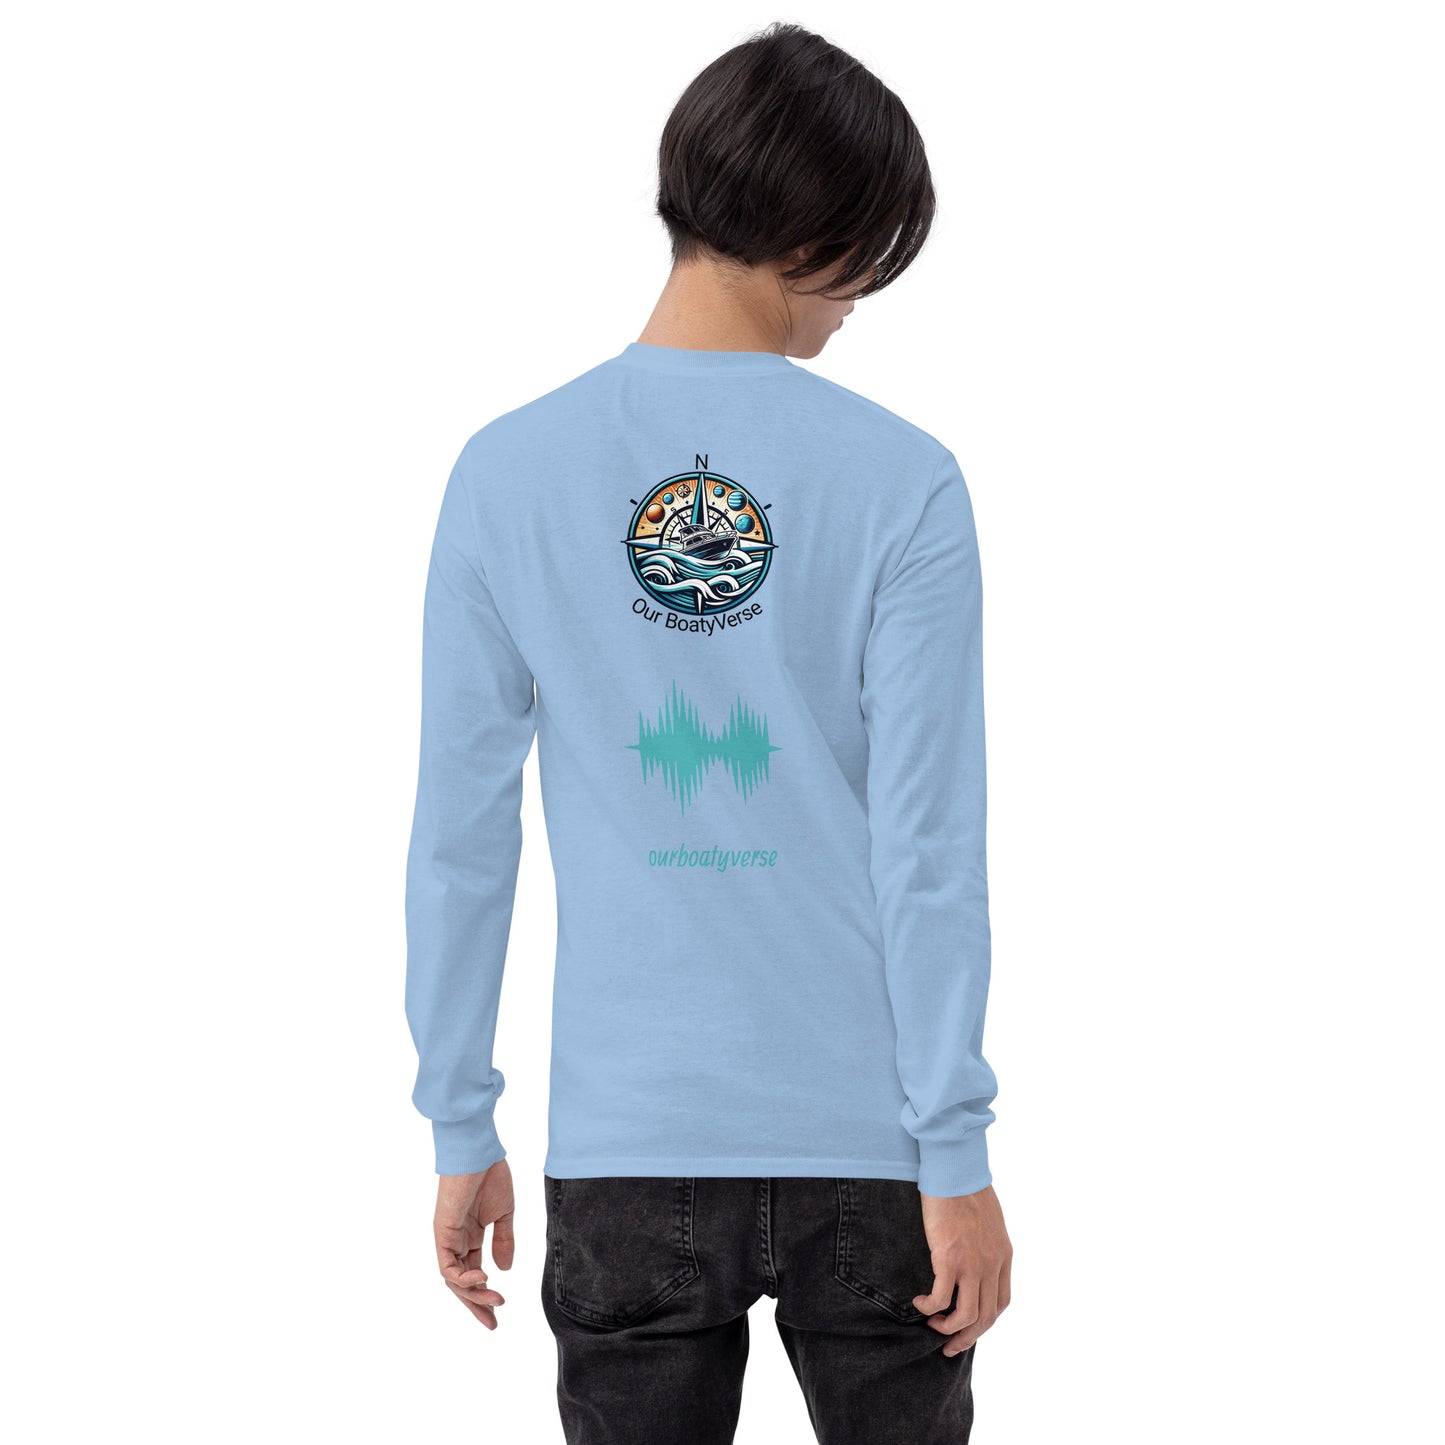 Sounds of the Ocean Men’s Long Sleeve Cotton Shirt By Our BoatyVerse